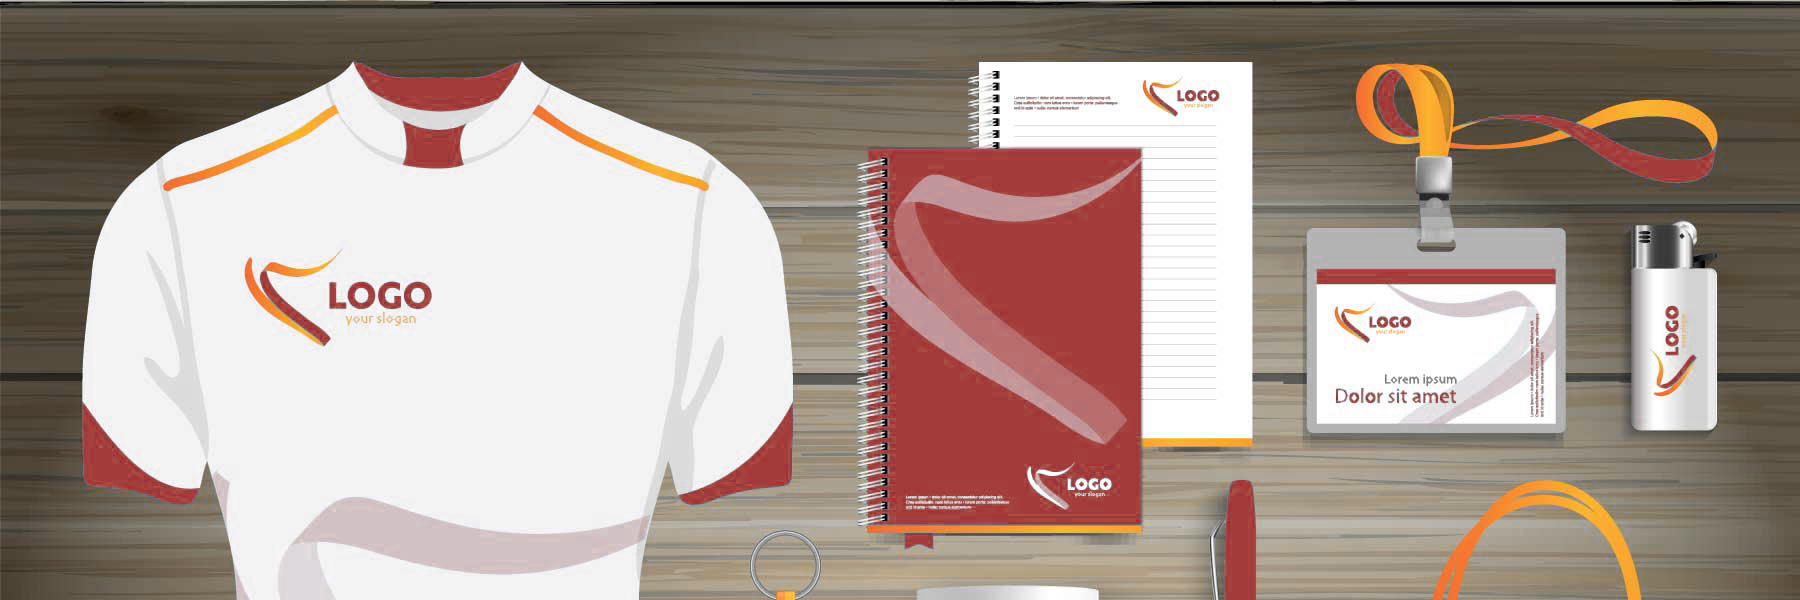 Samples of promo items: shirt with company logo, notebook cover with company branding, pen, bag, lighter, etc.